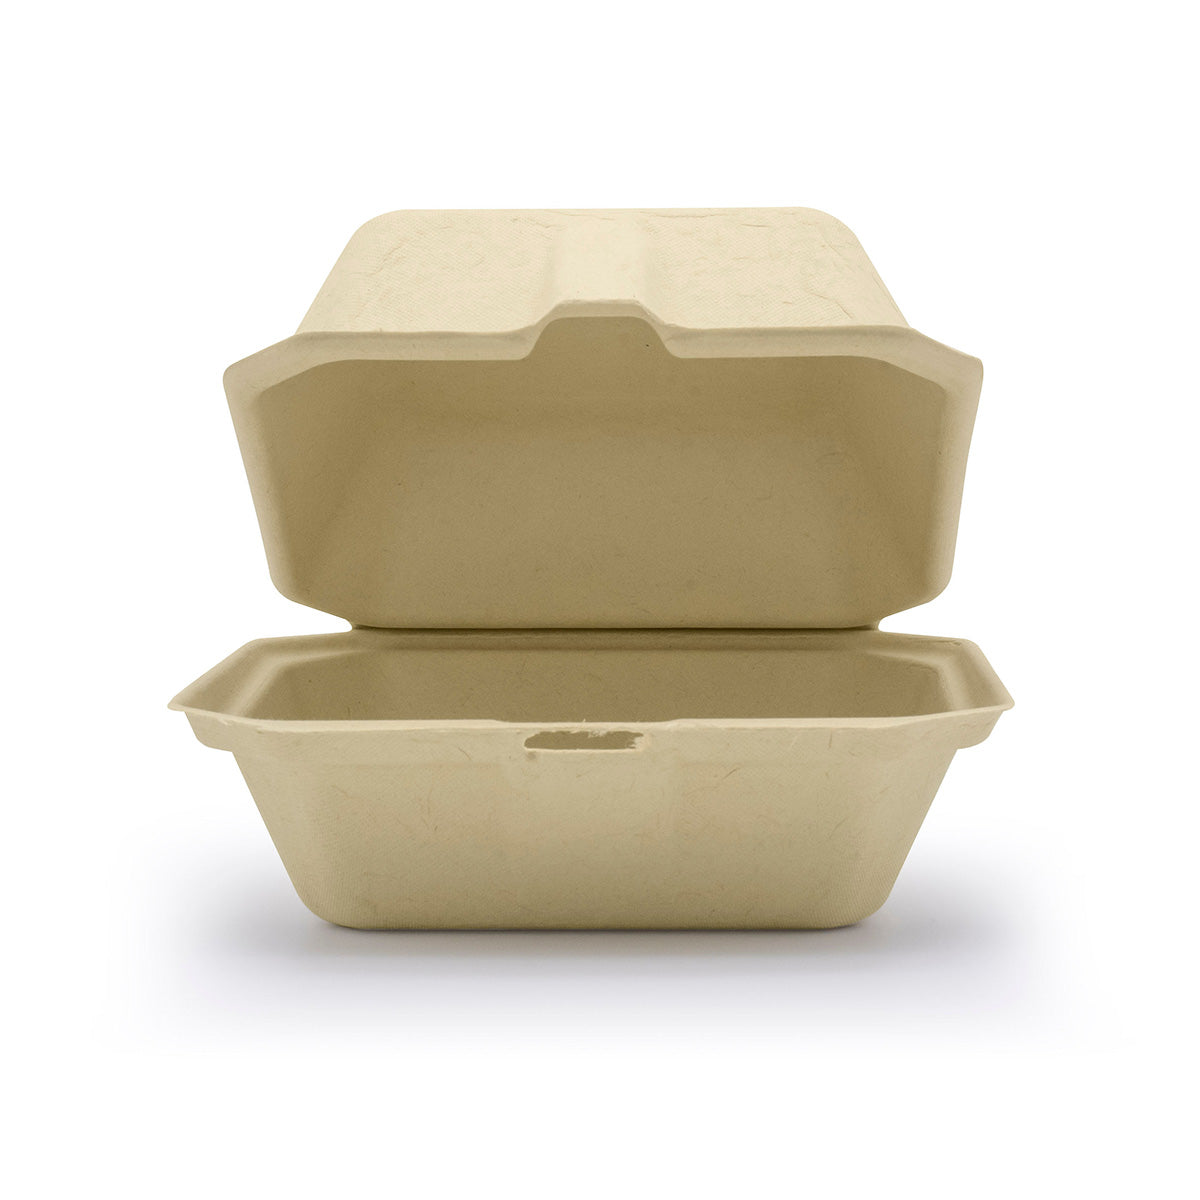 6" x 6" Compostable Clamshell | 1 Compartment | No PFAS Added (Pack of 200)